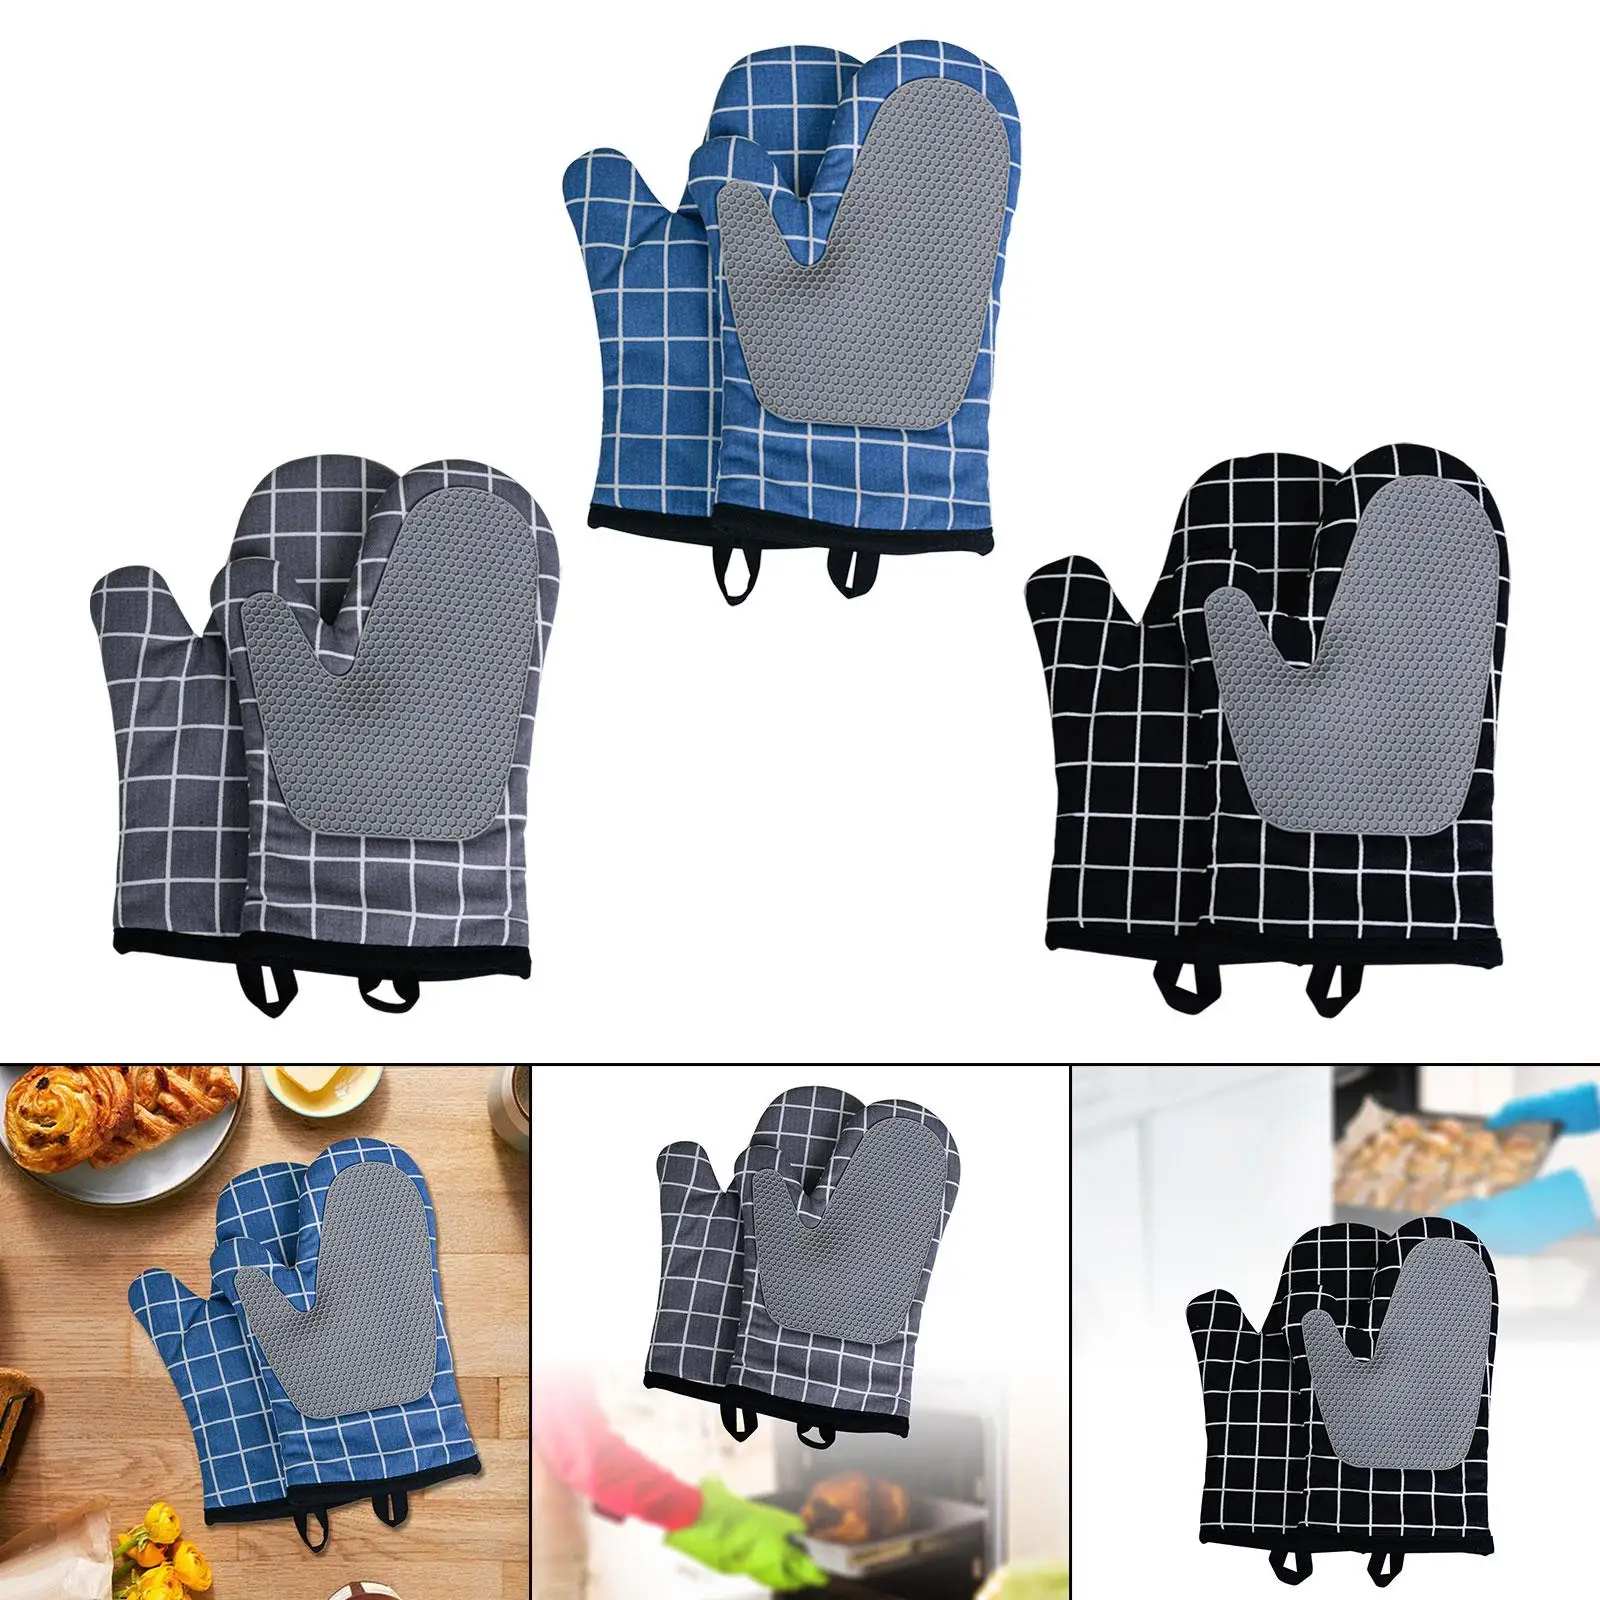 Splicing Silicone Oven Mitts Anti Slip Kitchen Mitts for Cooking BBQ Camping